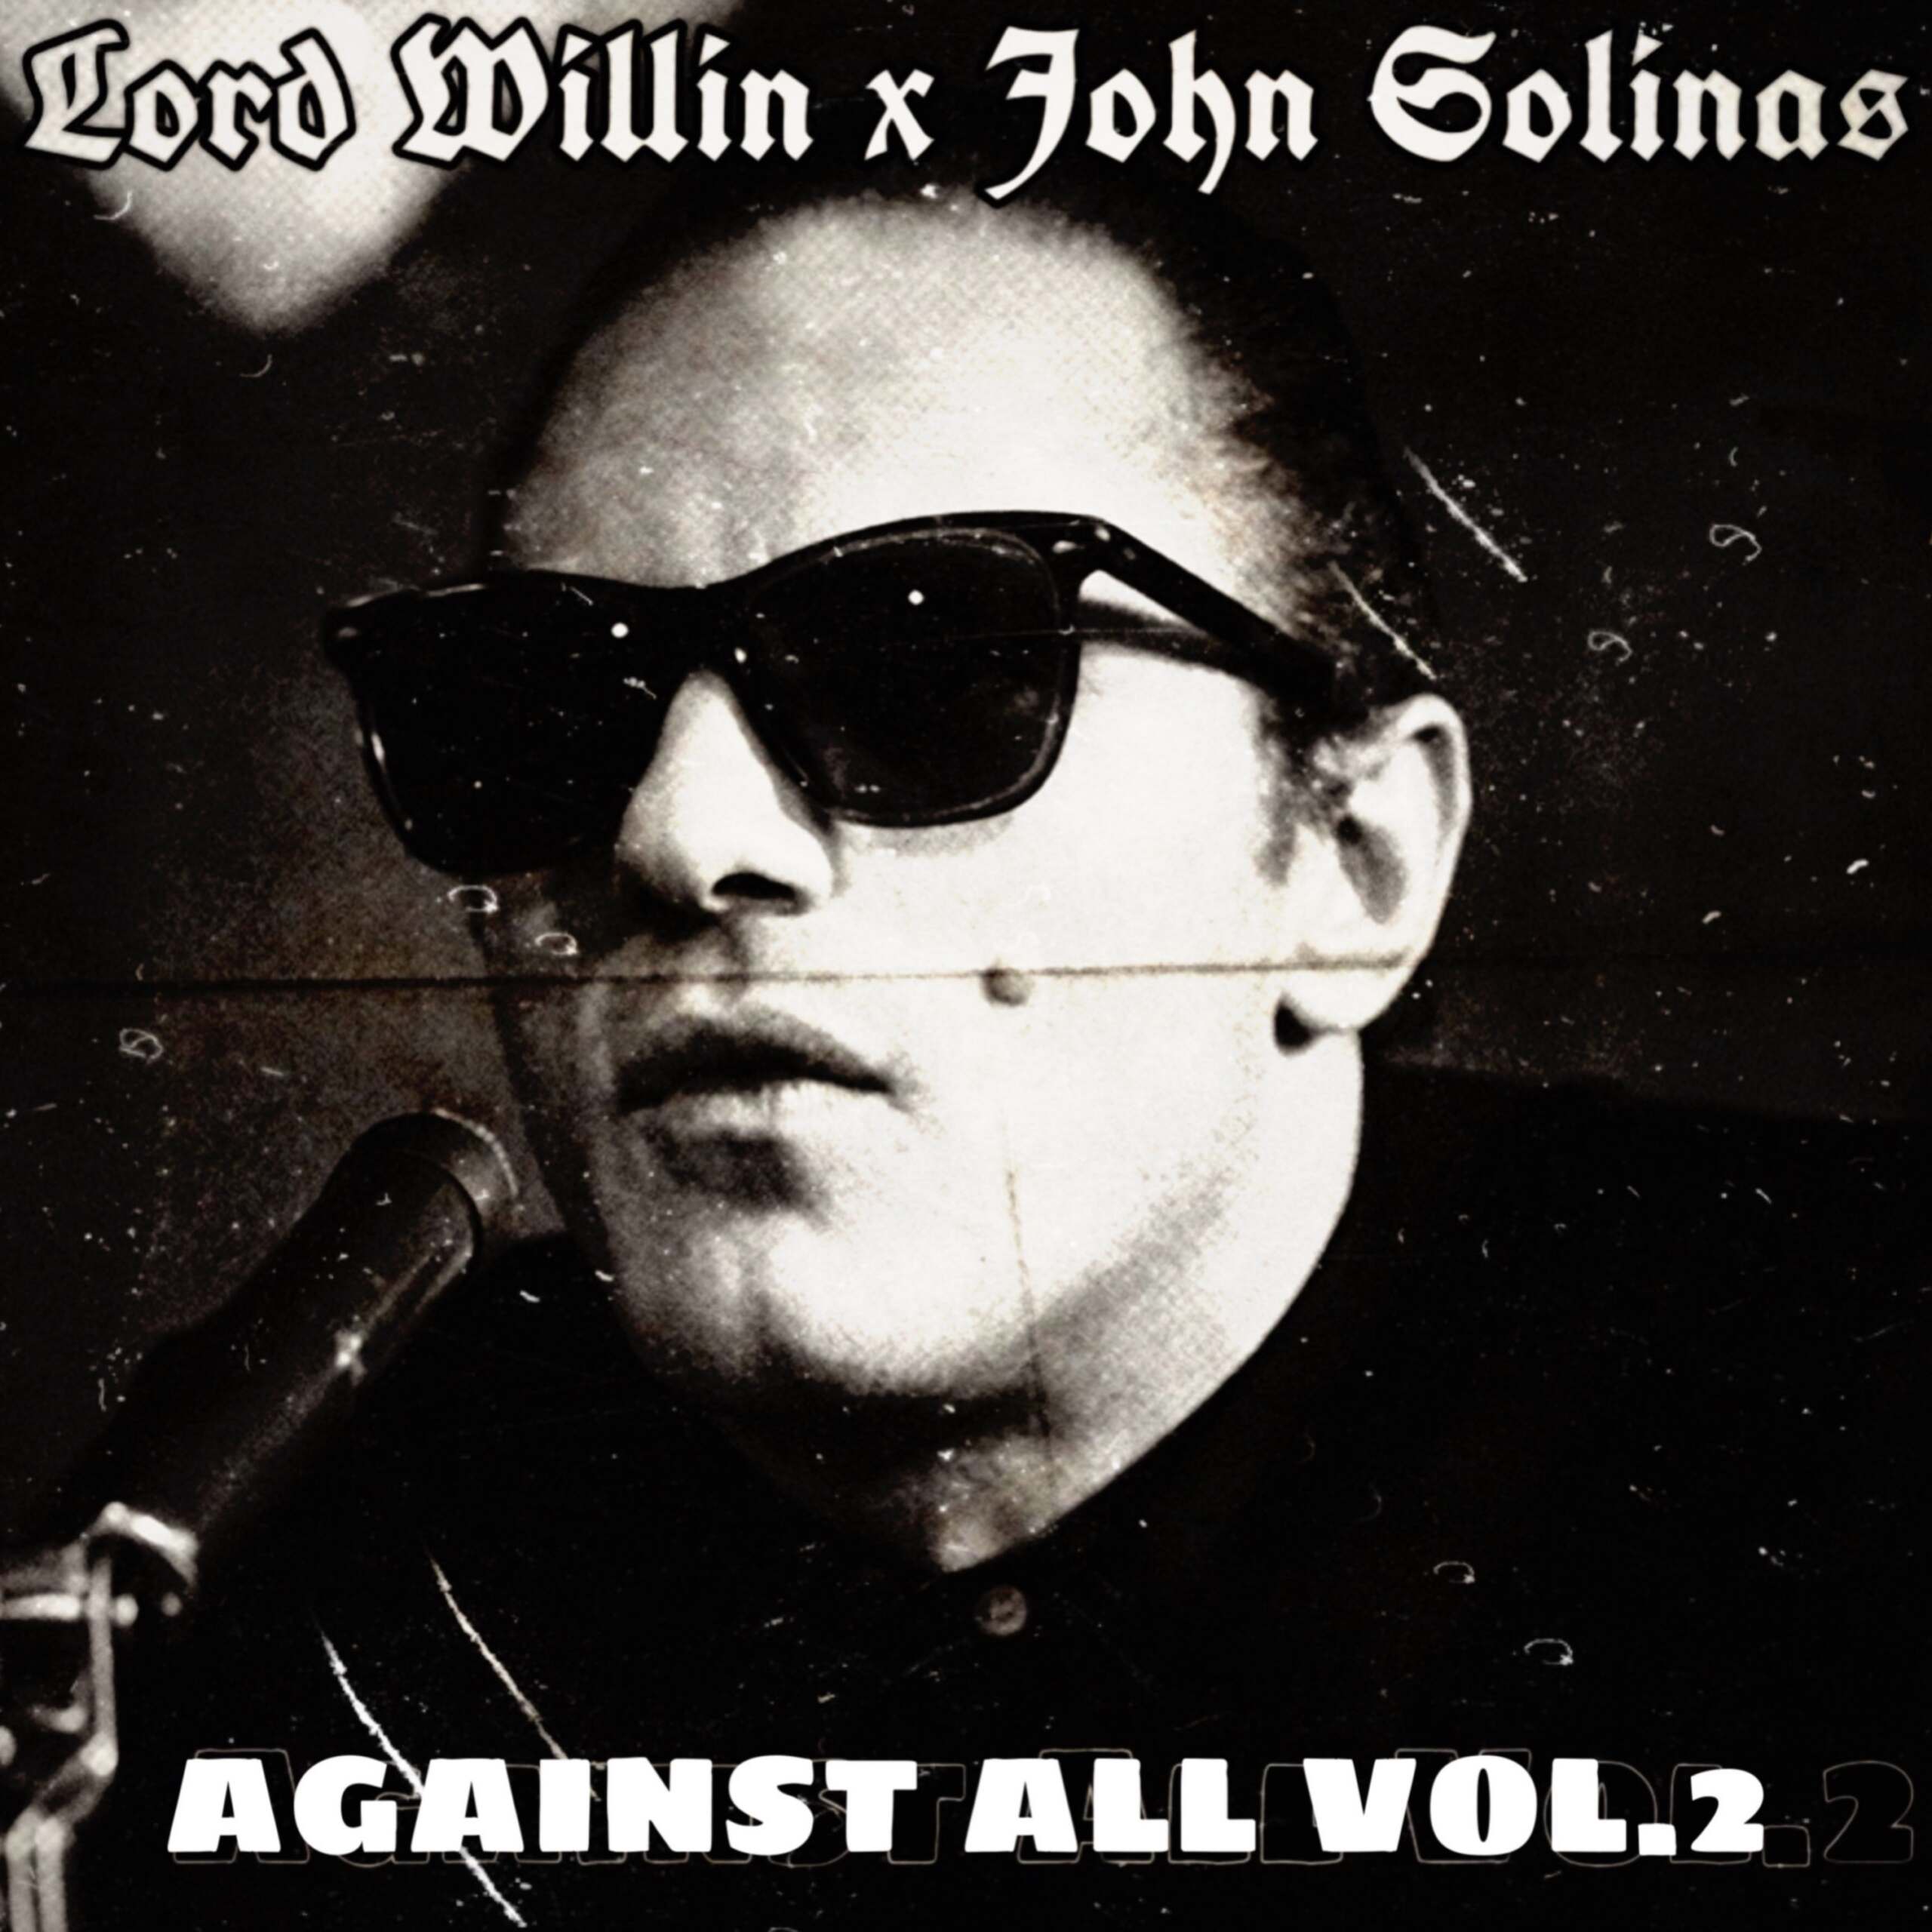 Watch The Lyric Video For Lord Willin & John Solinas' "State To State" feat. Pounds448